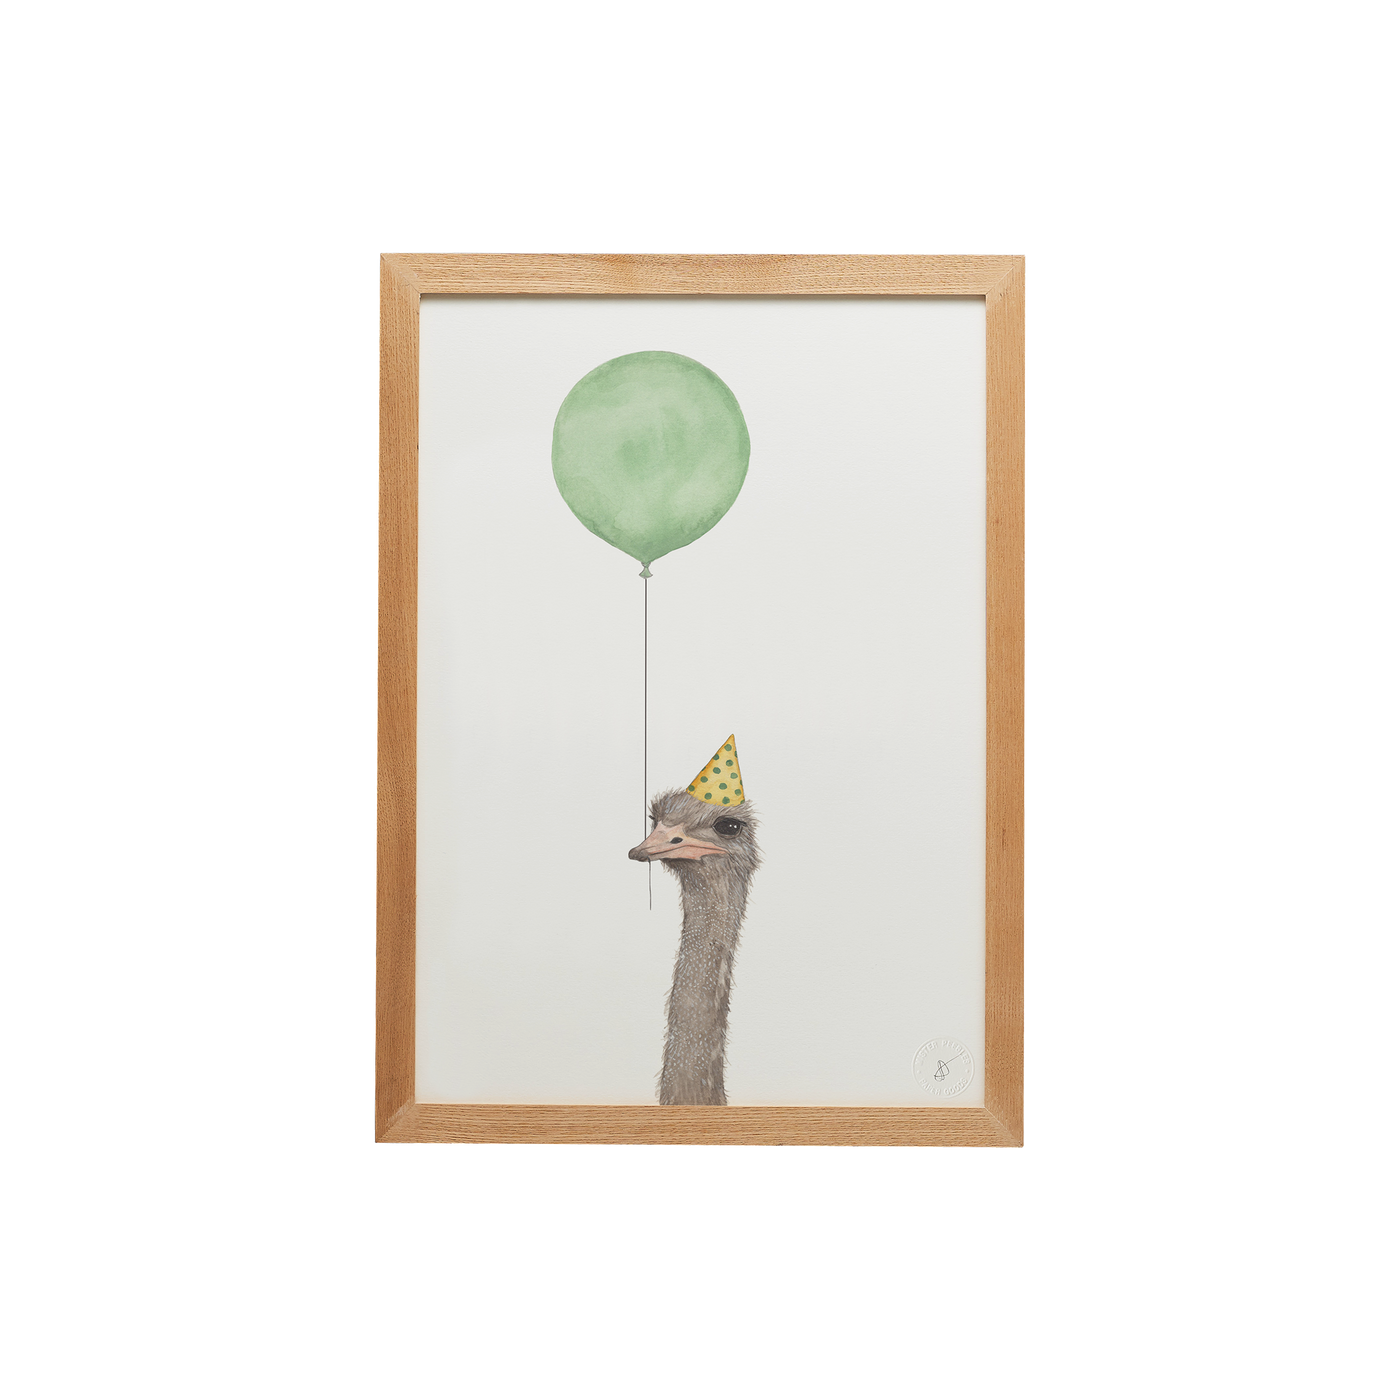 Balloon Animal Print Ostrich illustration with frame